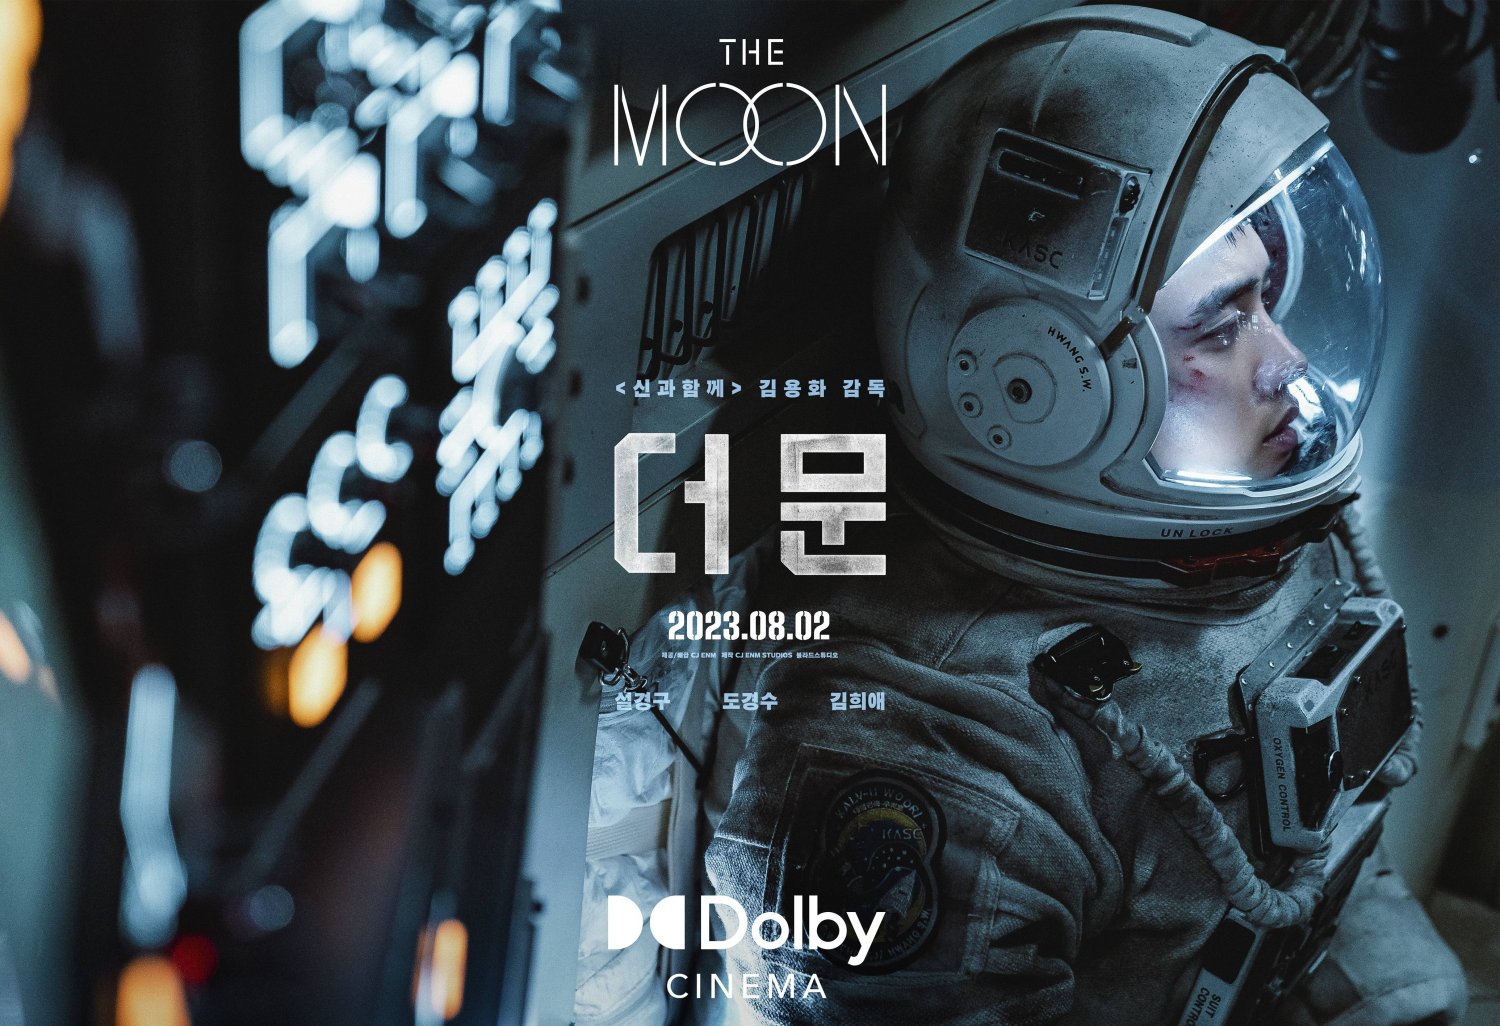 [Photo] New Poster Added for the Korean Movie 'The Moon